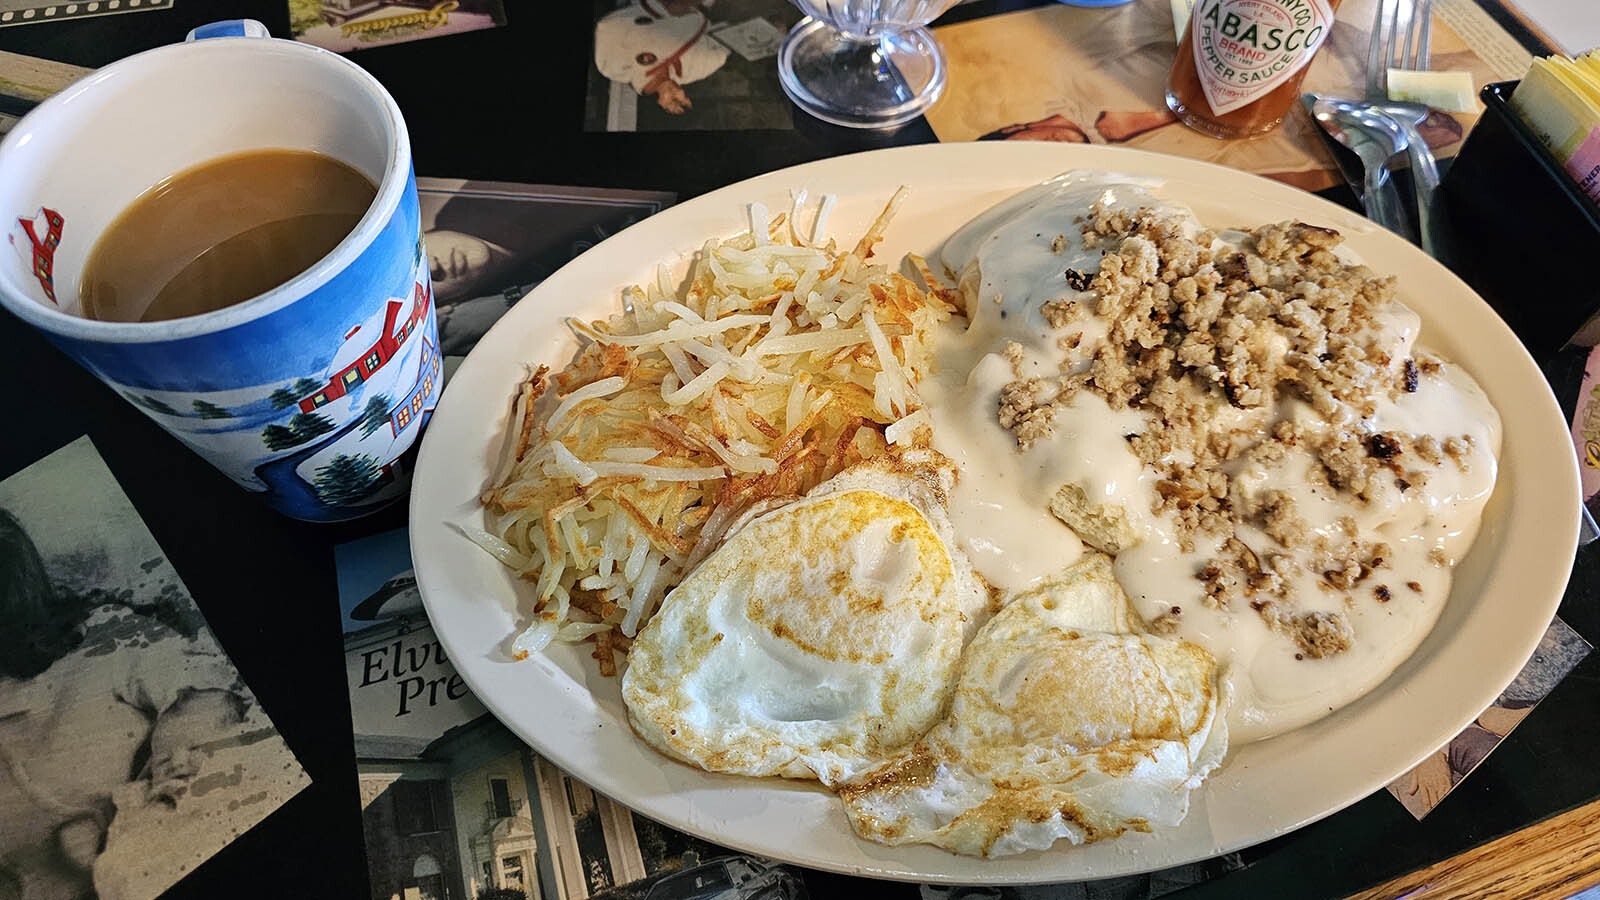 King-sized portions of crispy has browns, sausage gravy on biscuits and two eggs over easy, plus a bottomless cup of coffee. Hot sauce is optional, but we're sure Elvis would have approved either way.